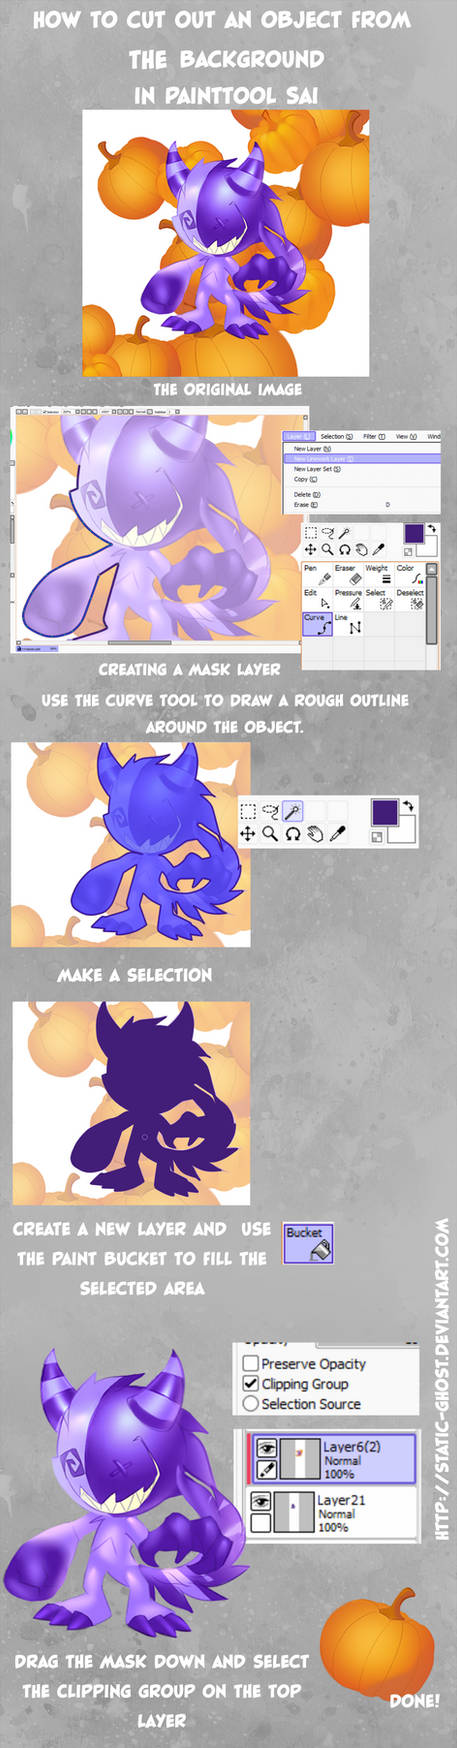 Useful tips: how to remove background in SAI by Static-ghost on DeviantArt